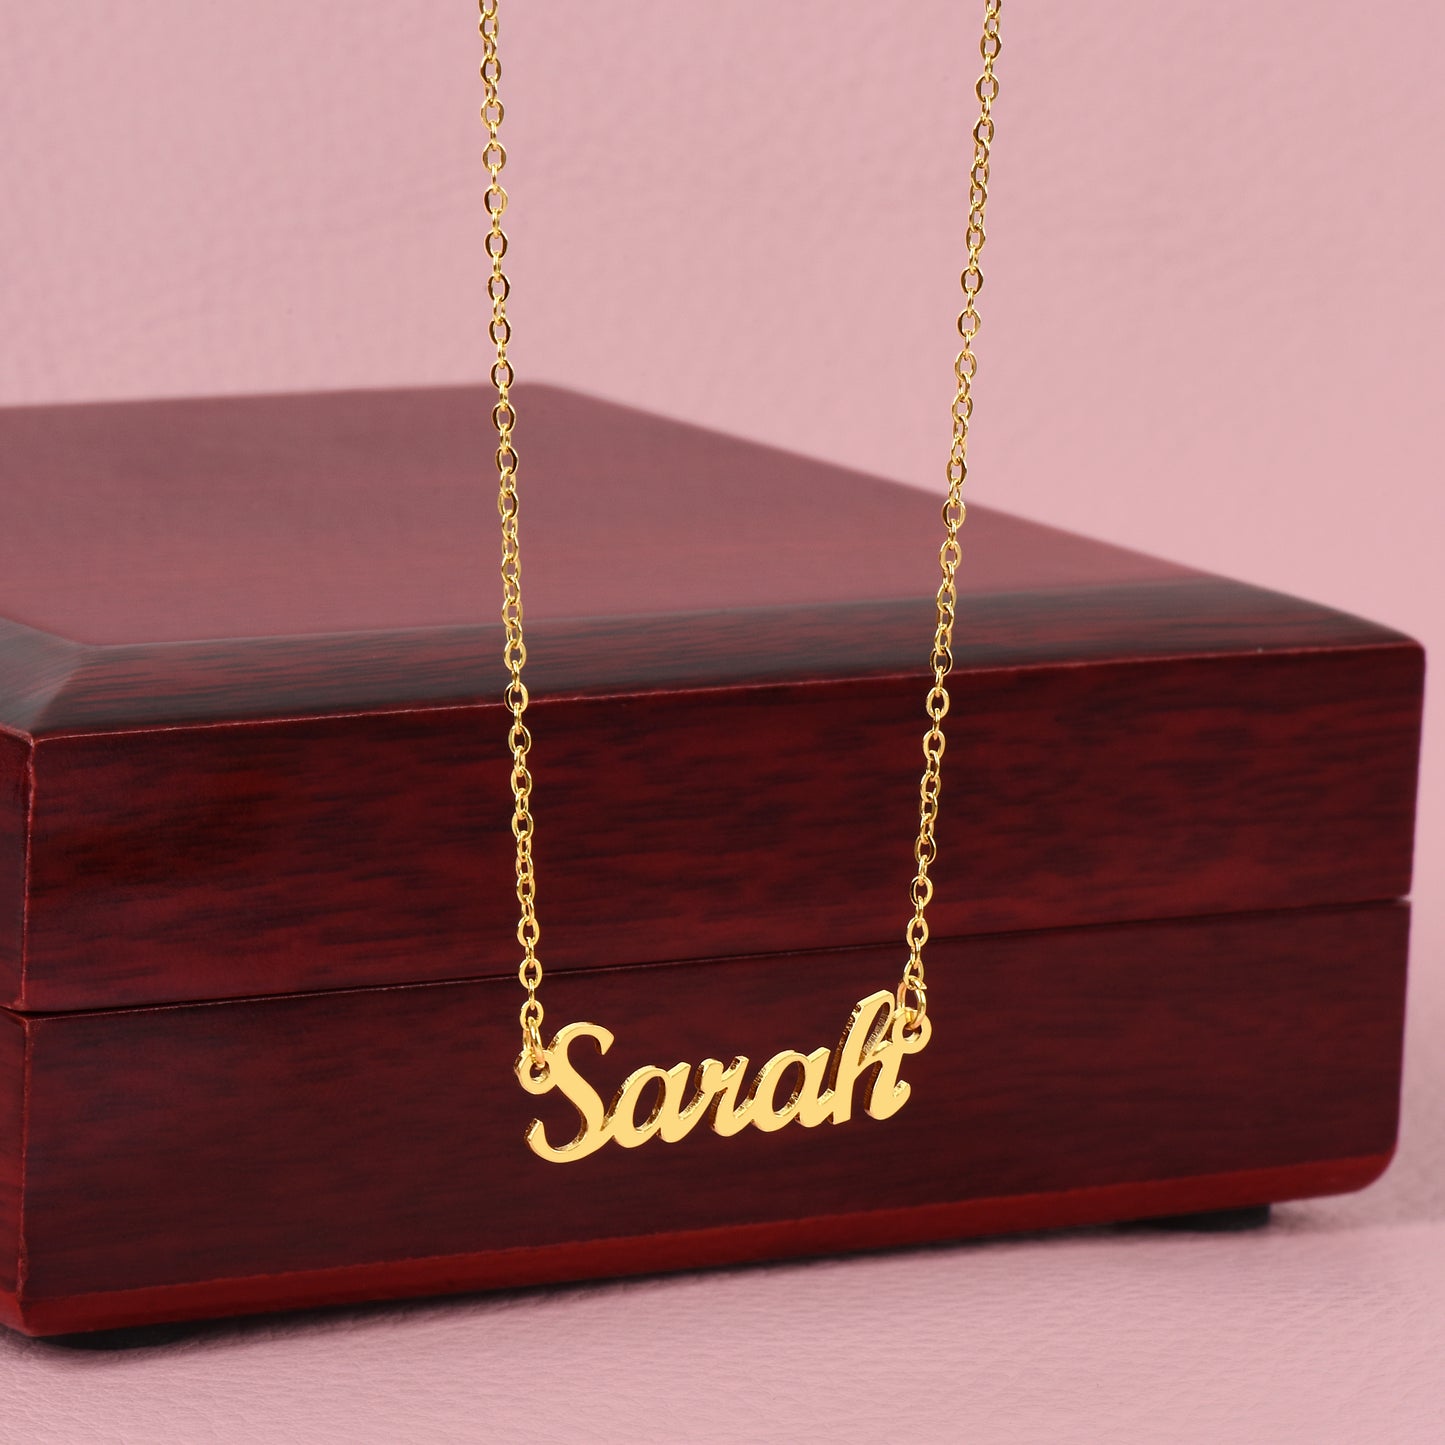 Keep Reaching Name Necklace